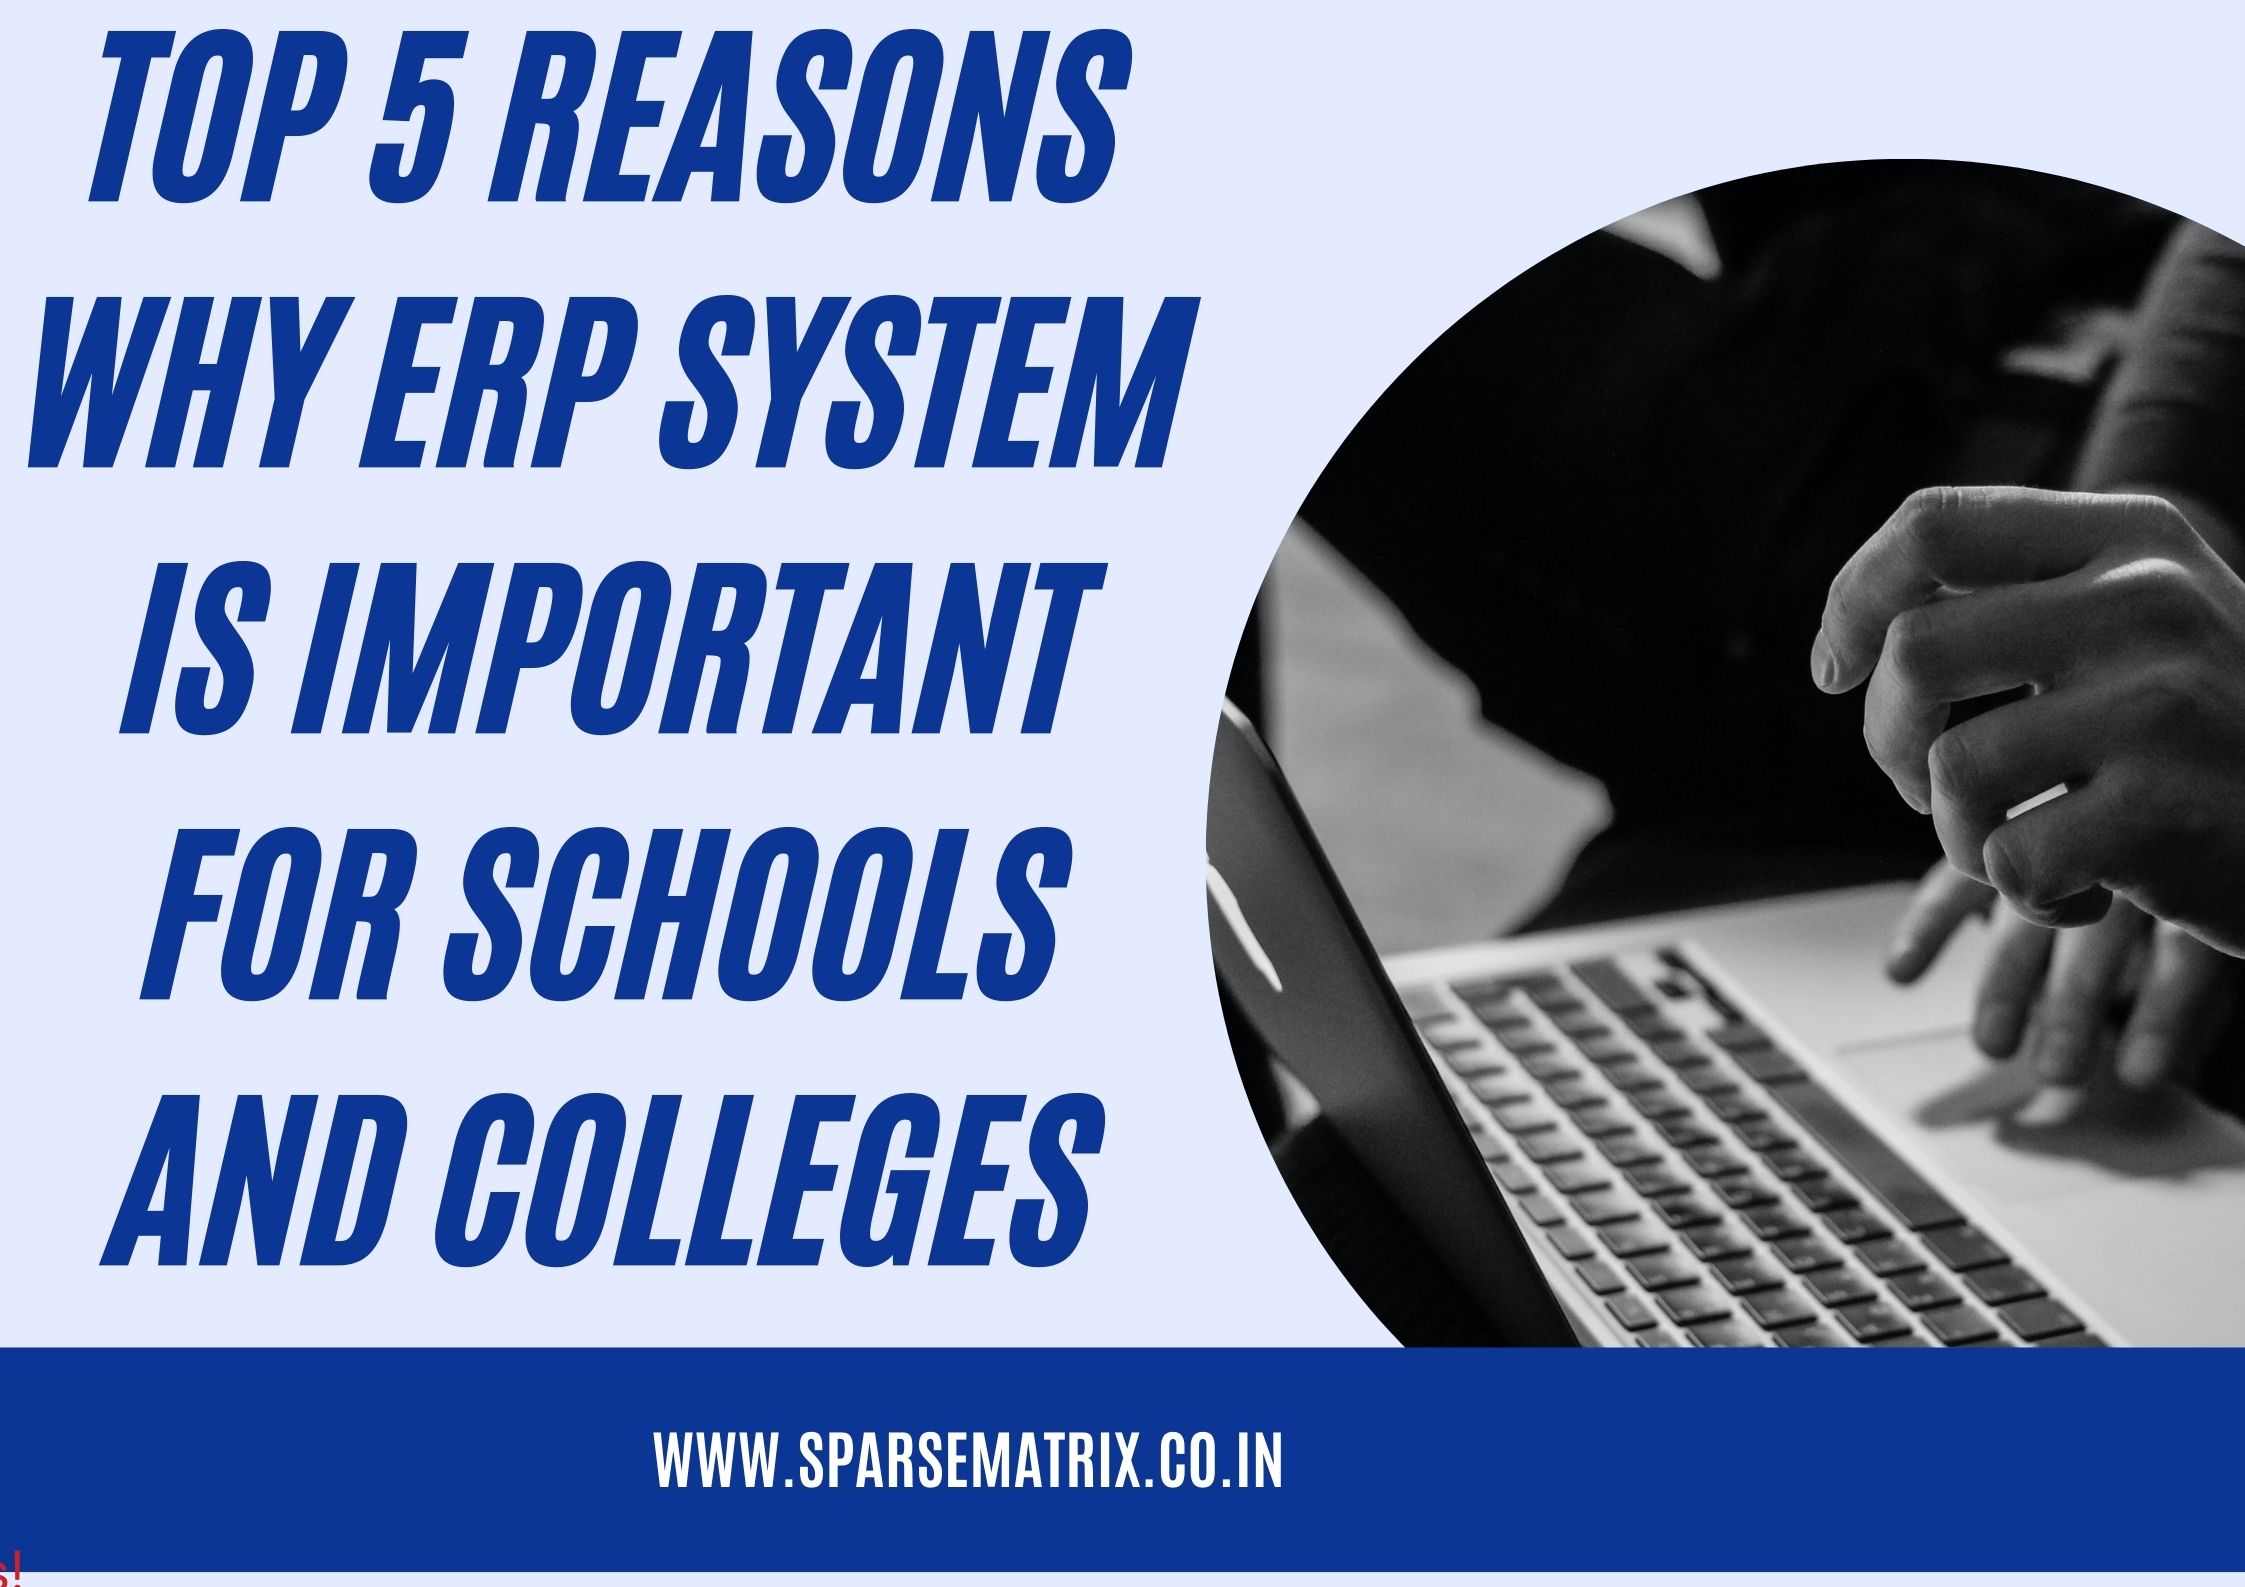 Top 5 Reasons Why ERP System is Important for Schools and Colleges